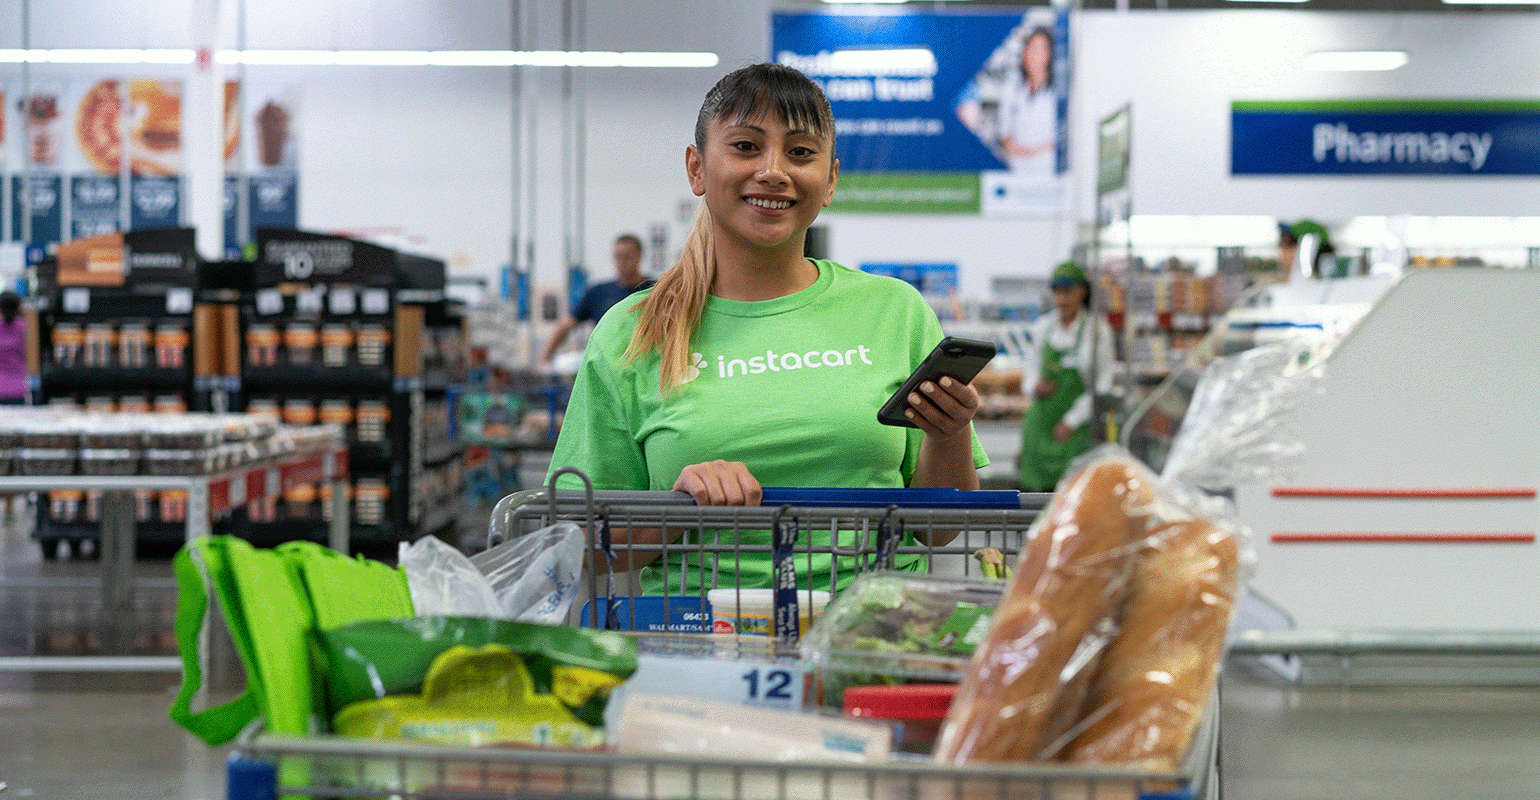 Can You Use Food Stamps At Sam S Club Online Sam S Club Expands Partnership With Instacart Supermarket News